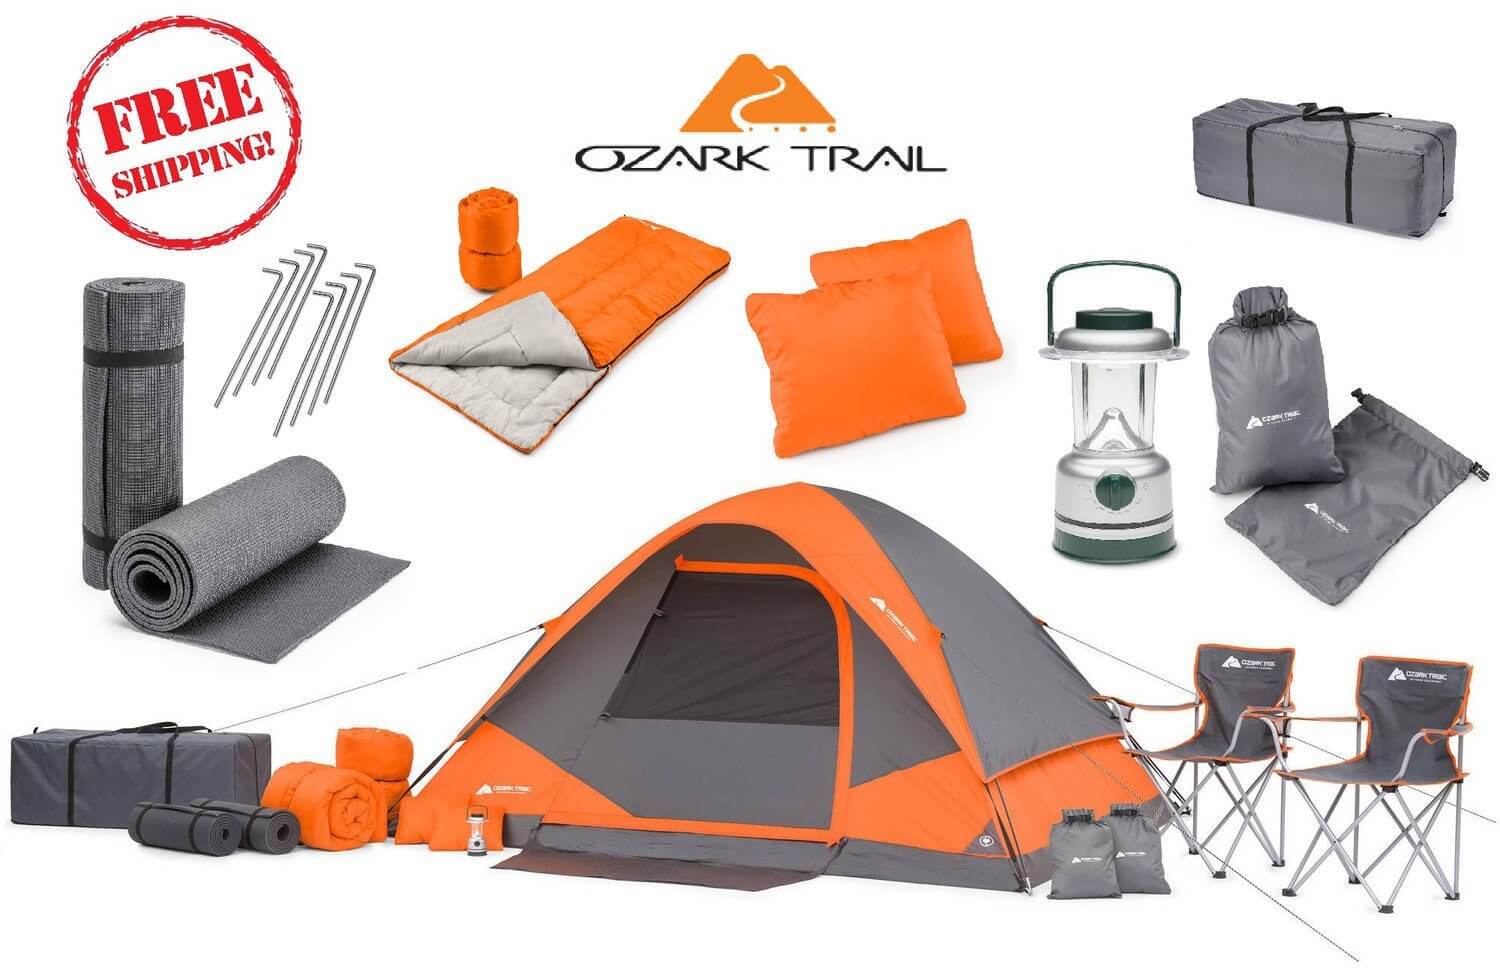 Family Cabin Camping Equipment Set